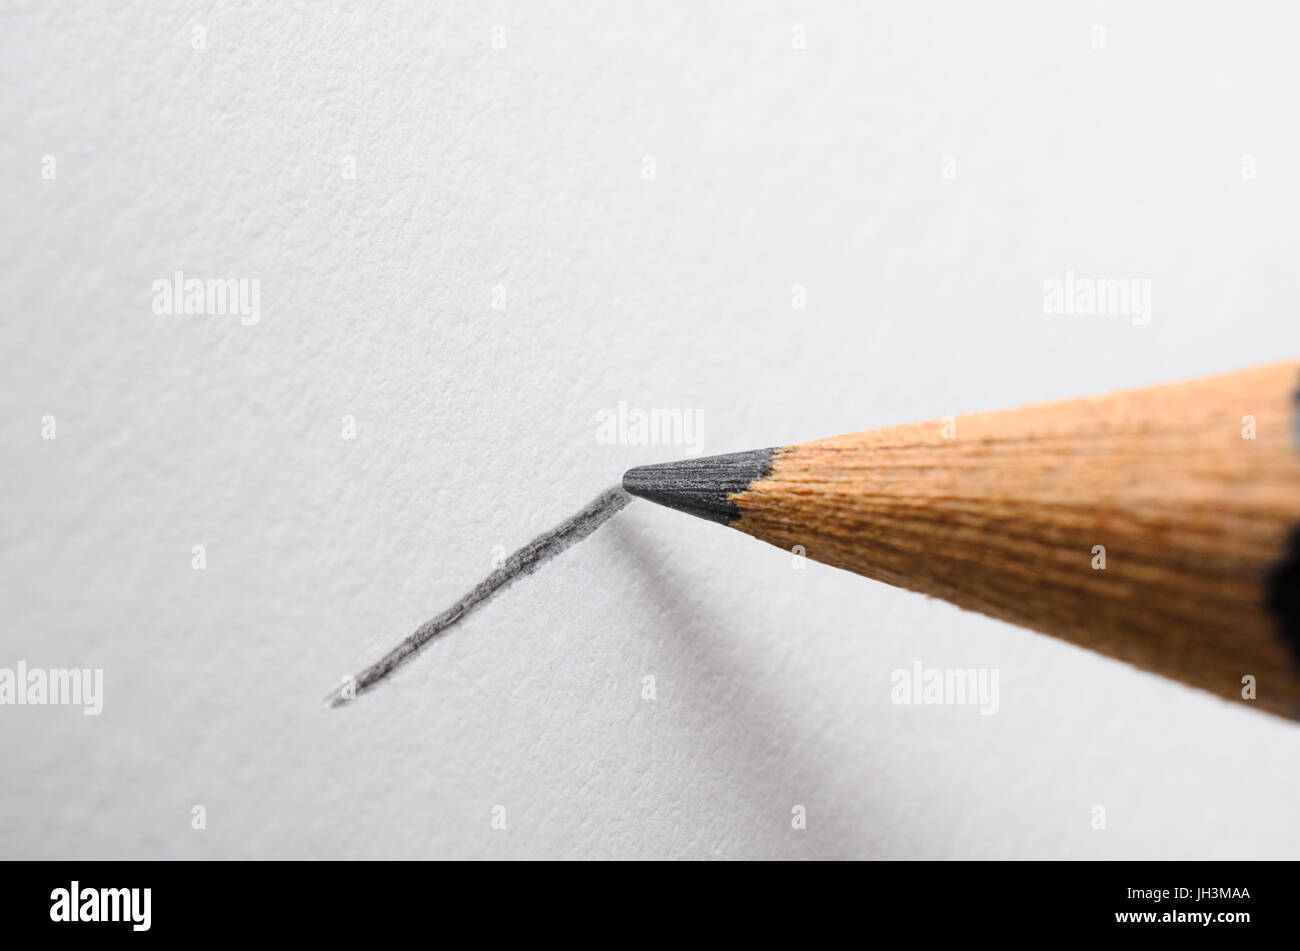 Angled close up (macro) of a graphite pencil drawing a line on textured white paper. Stock Photo